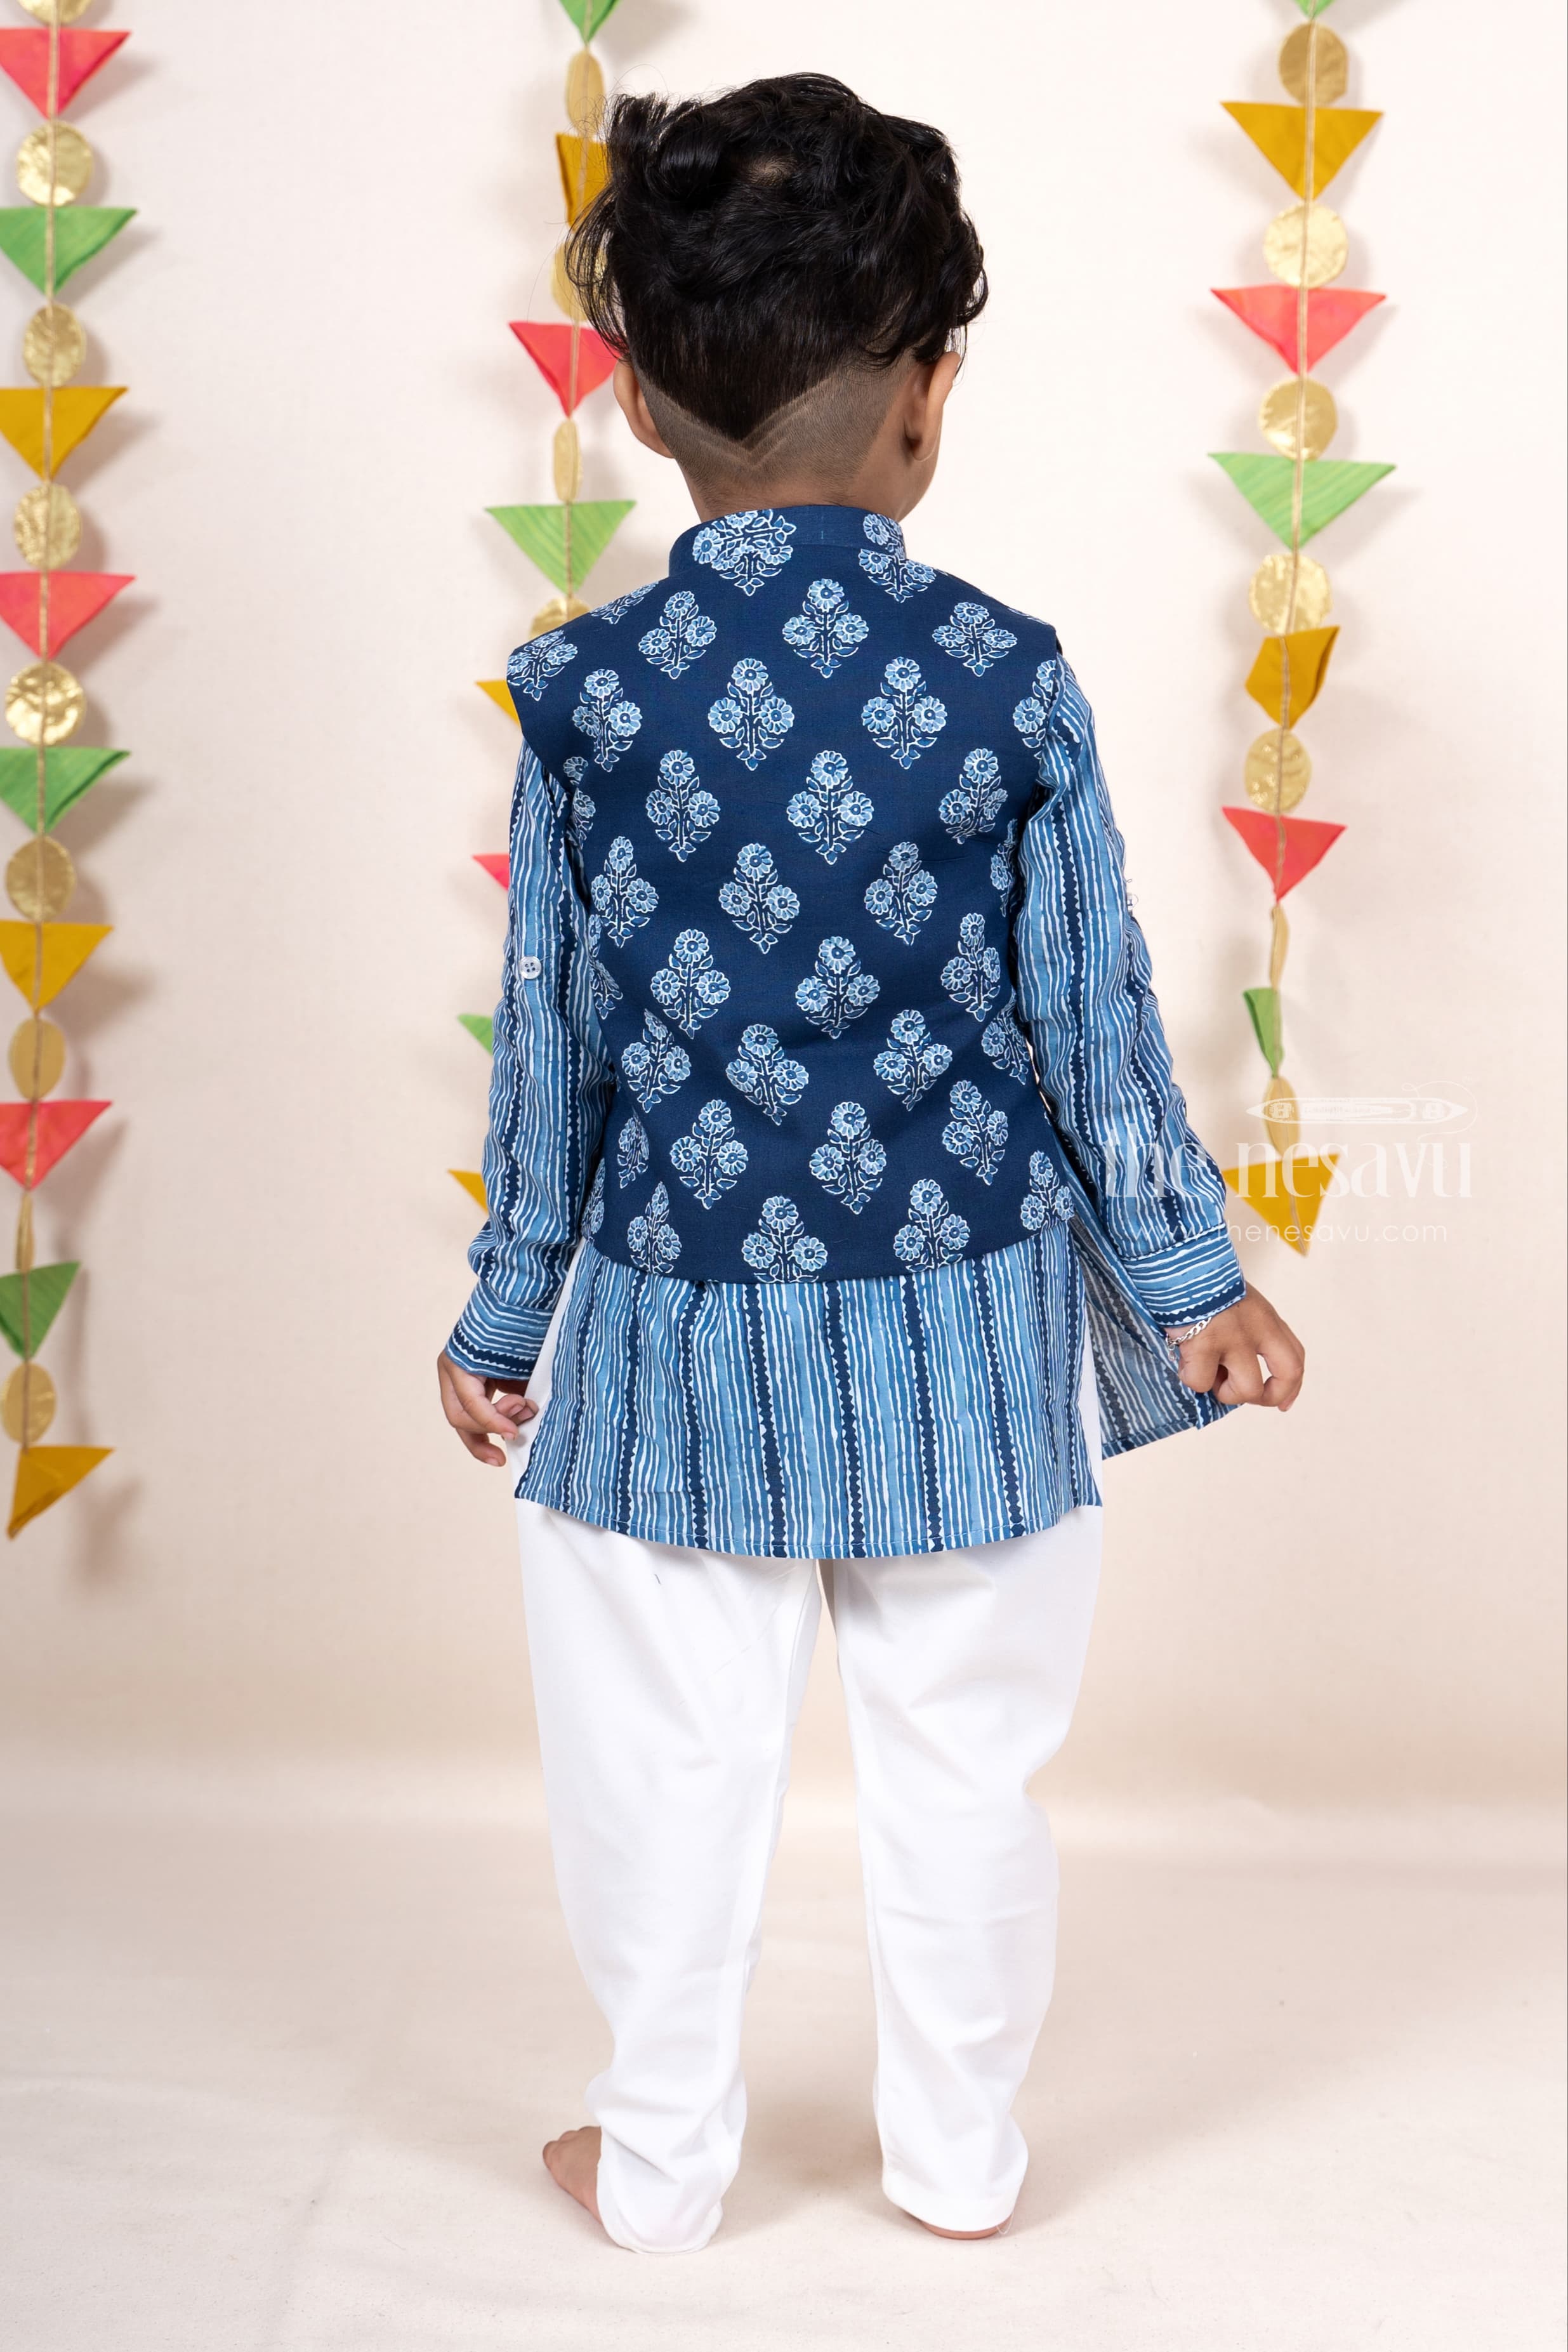 Cotton Kids Boys Ethnic Wear at best price in Ahmedabad | ID: 23510208512